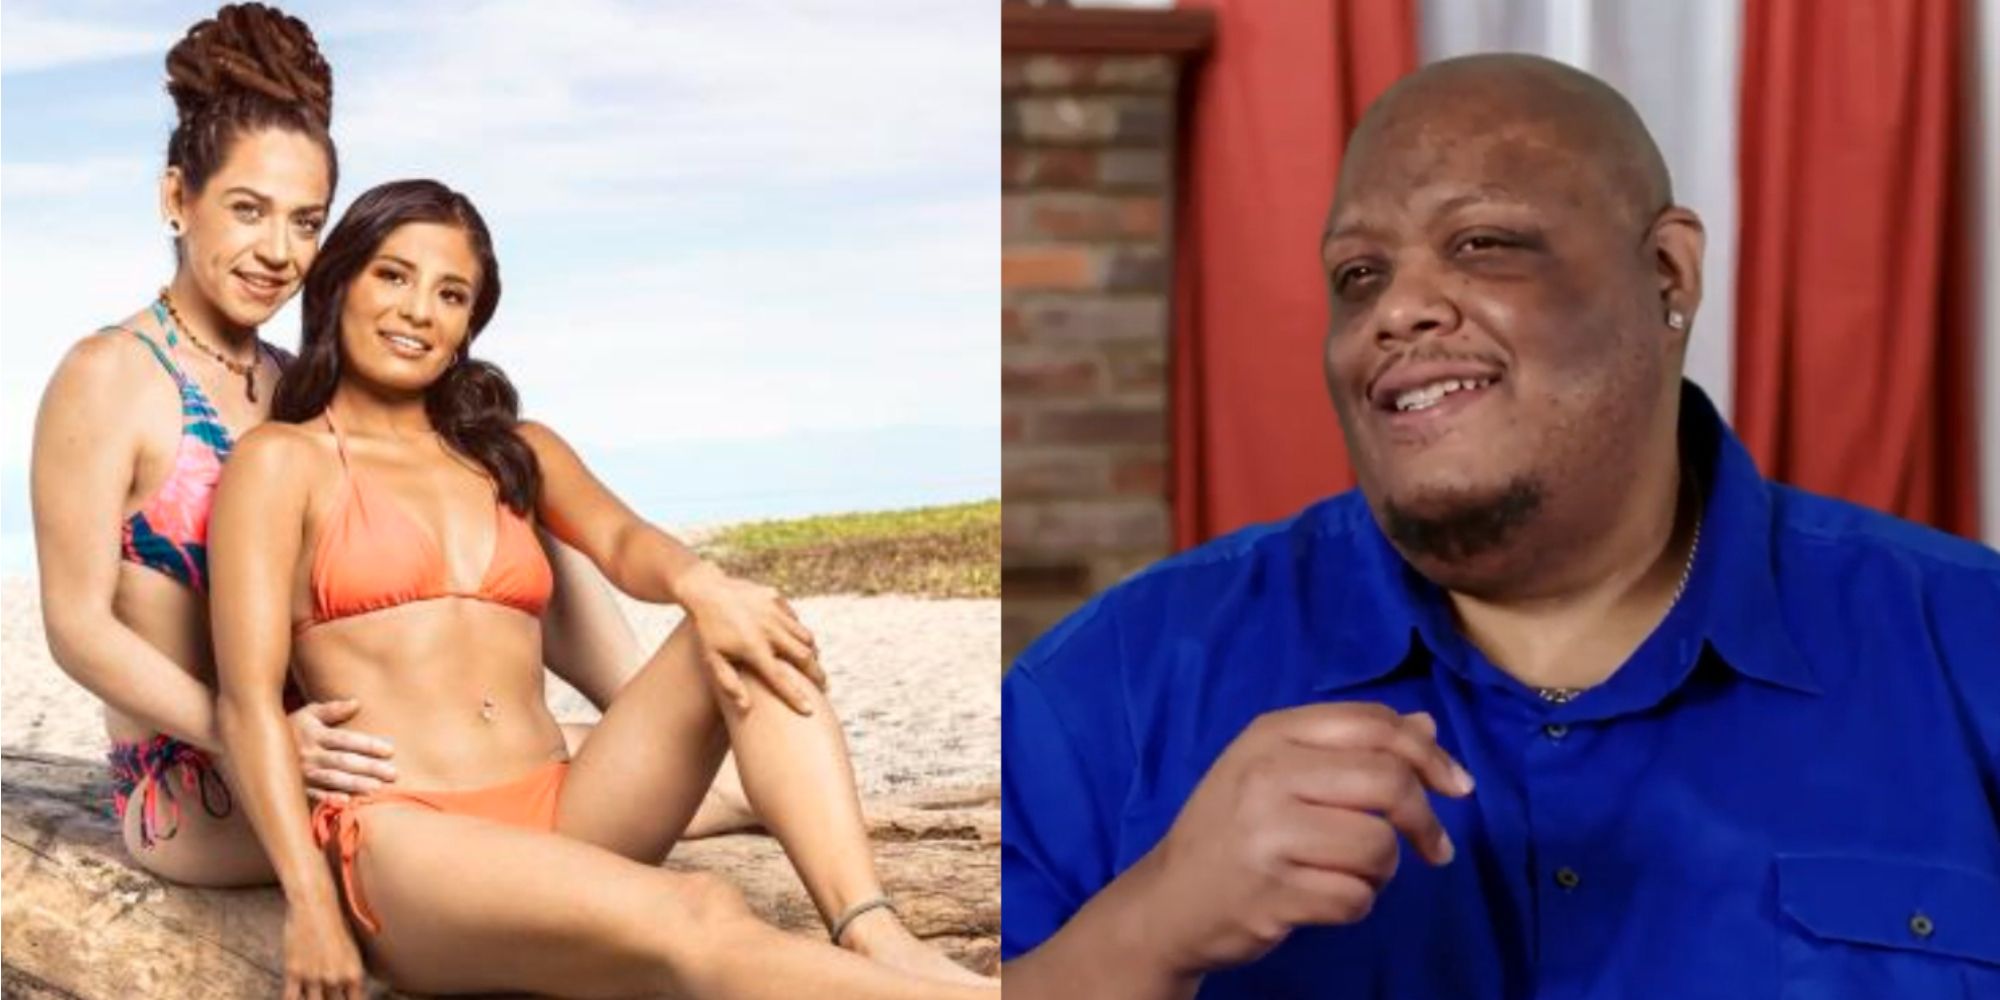 Split image of Gaby and Abby and Frankie from 90 Day Fiance Love in Paradise side by side images